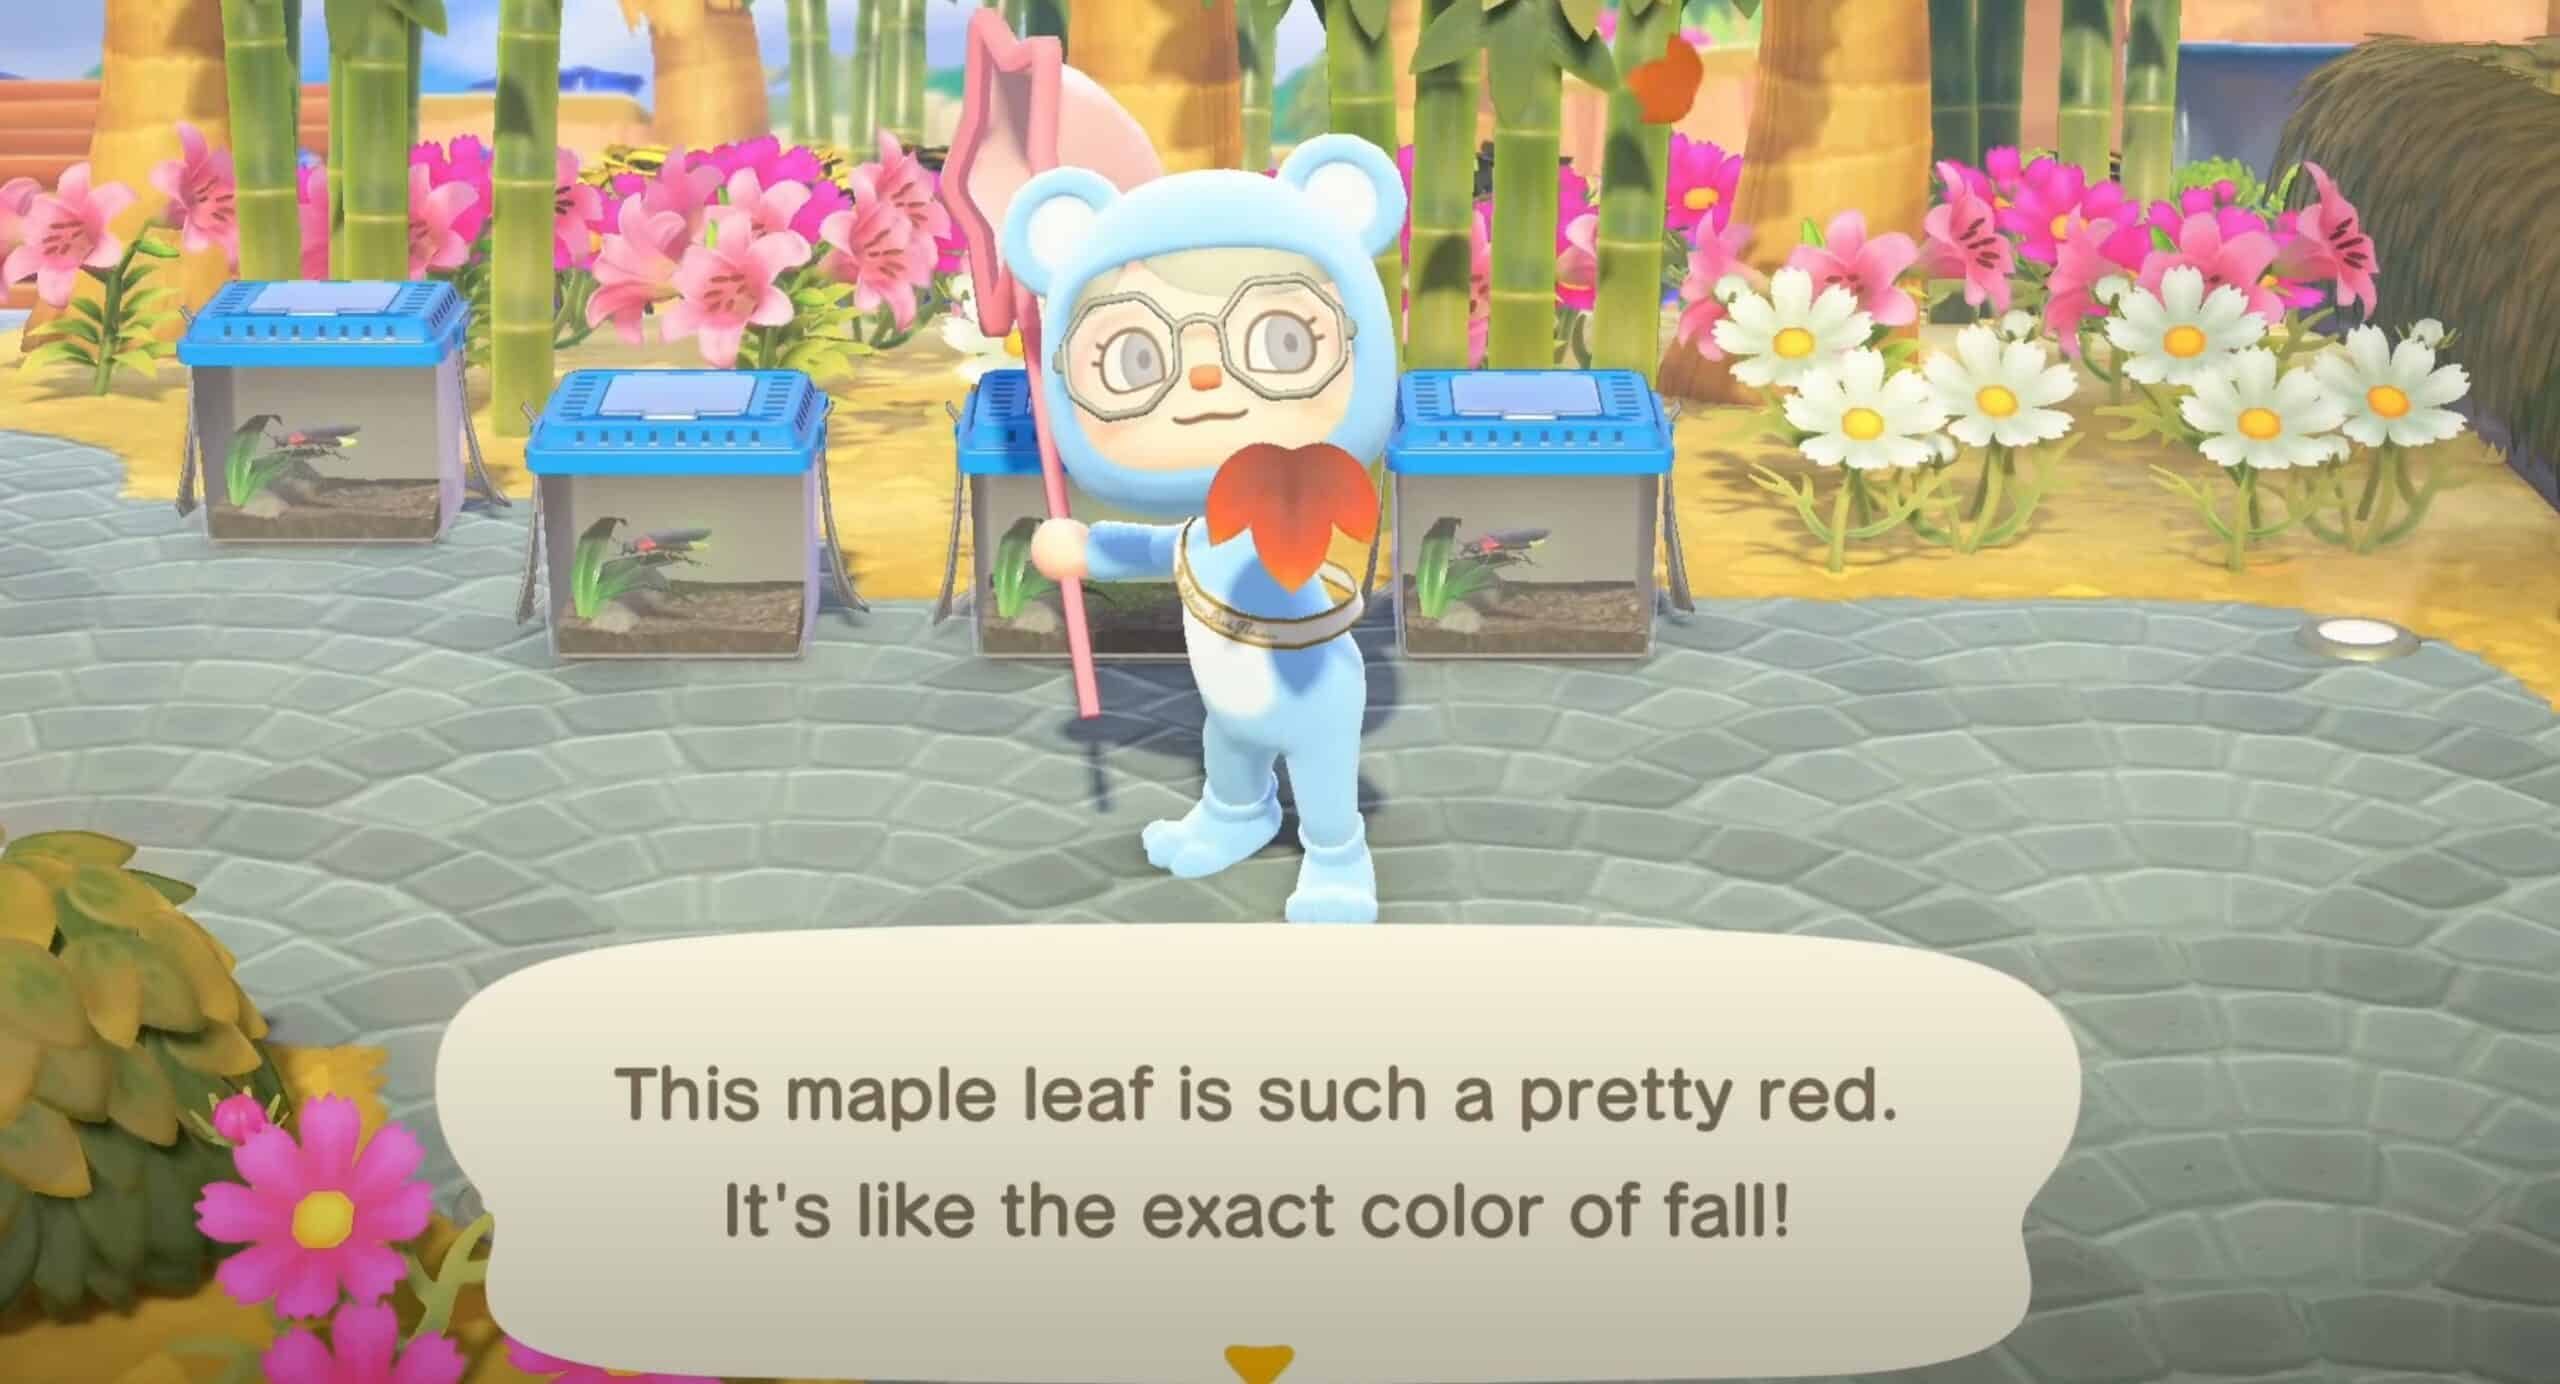 How to get Maple Leaf in Animal Crossing New Horizons